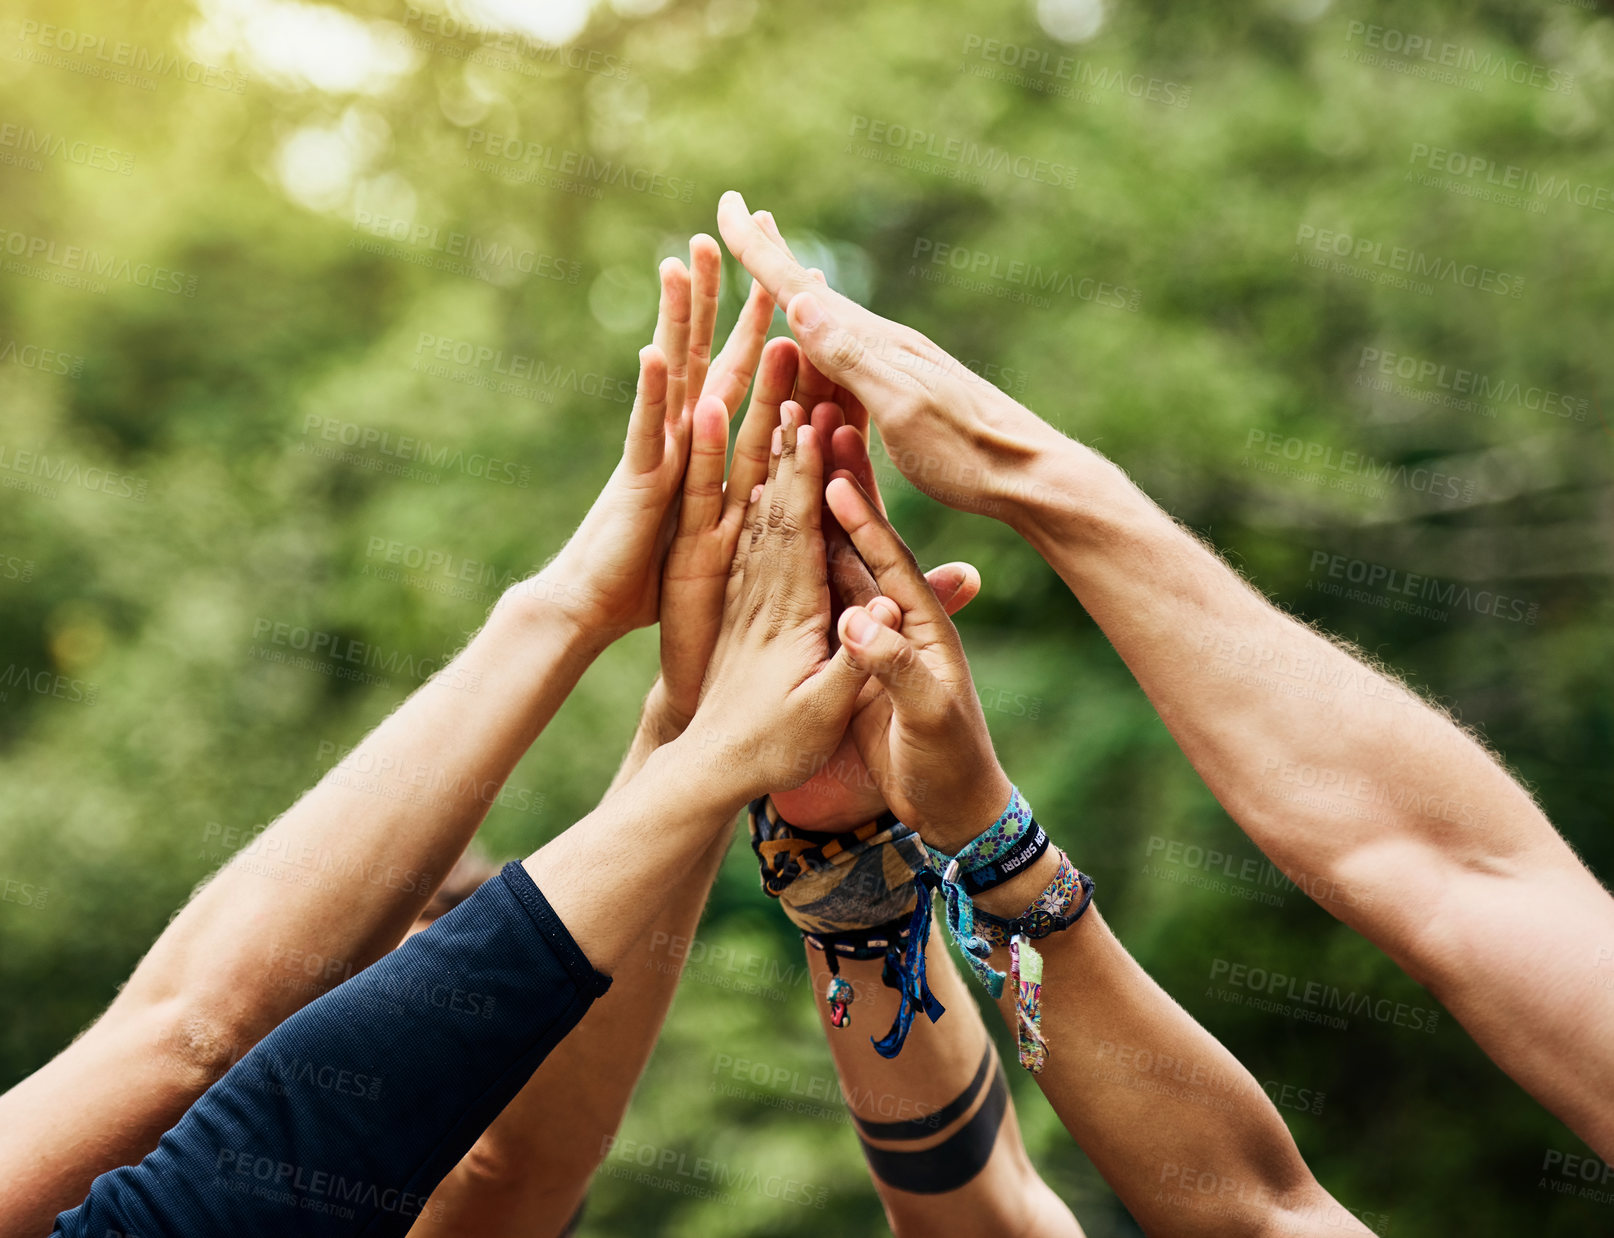 Buy stock photo Shot of a group of unrecognizable people's hands raised in the air to form a huddle together outside during the day